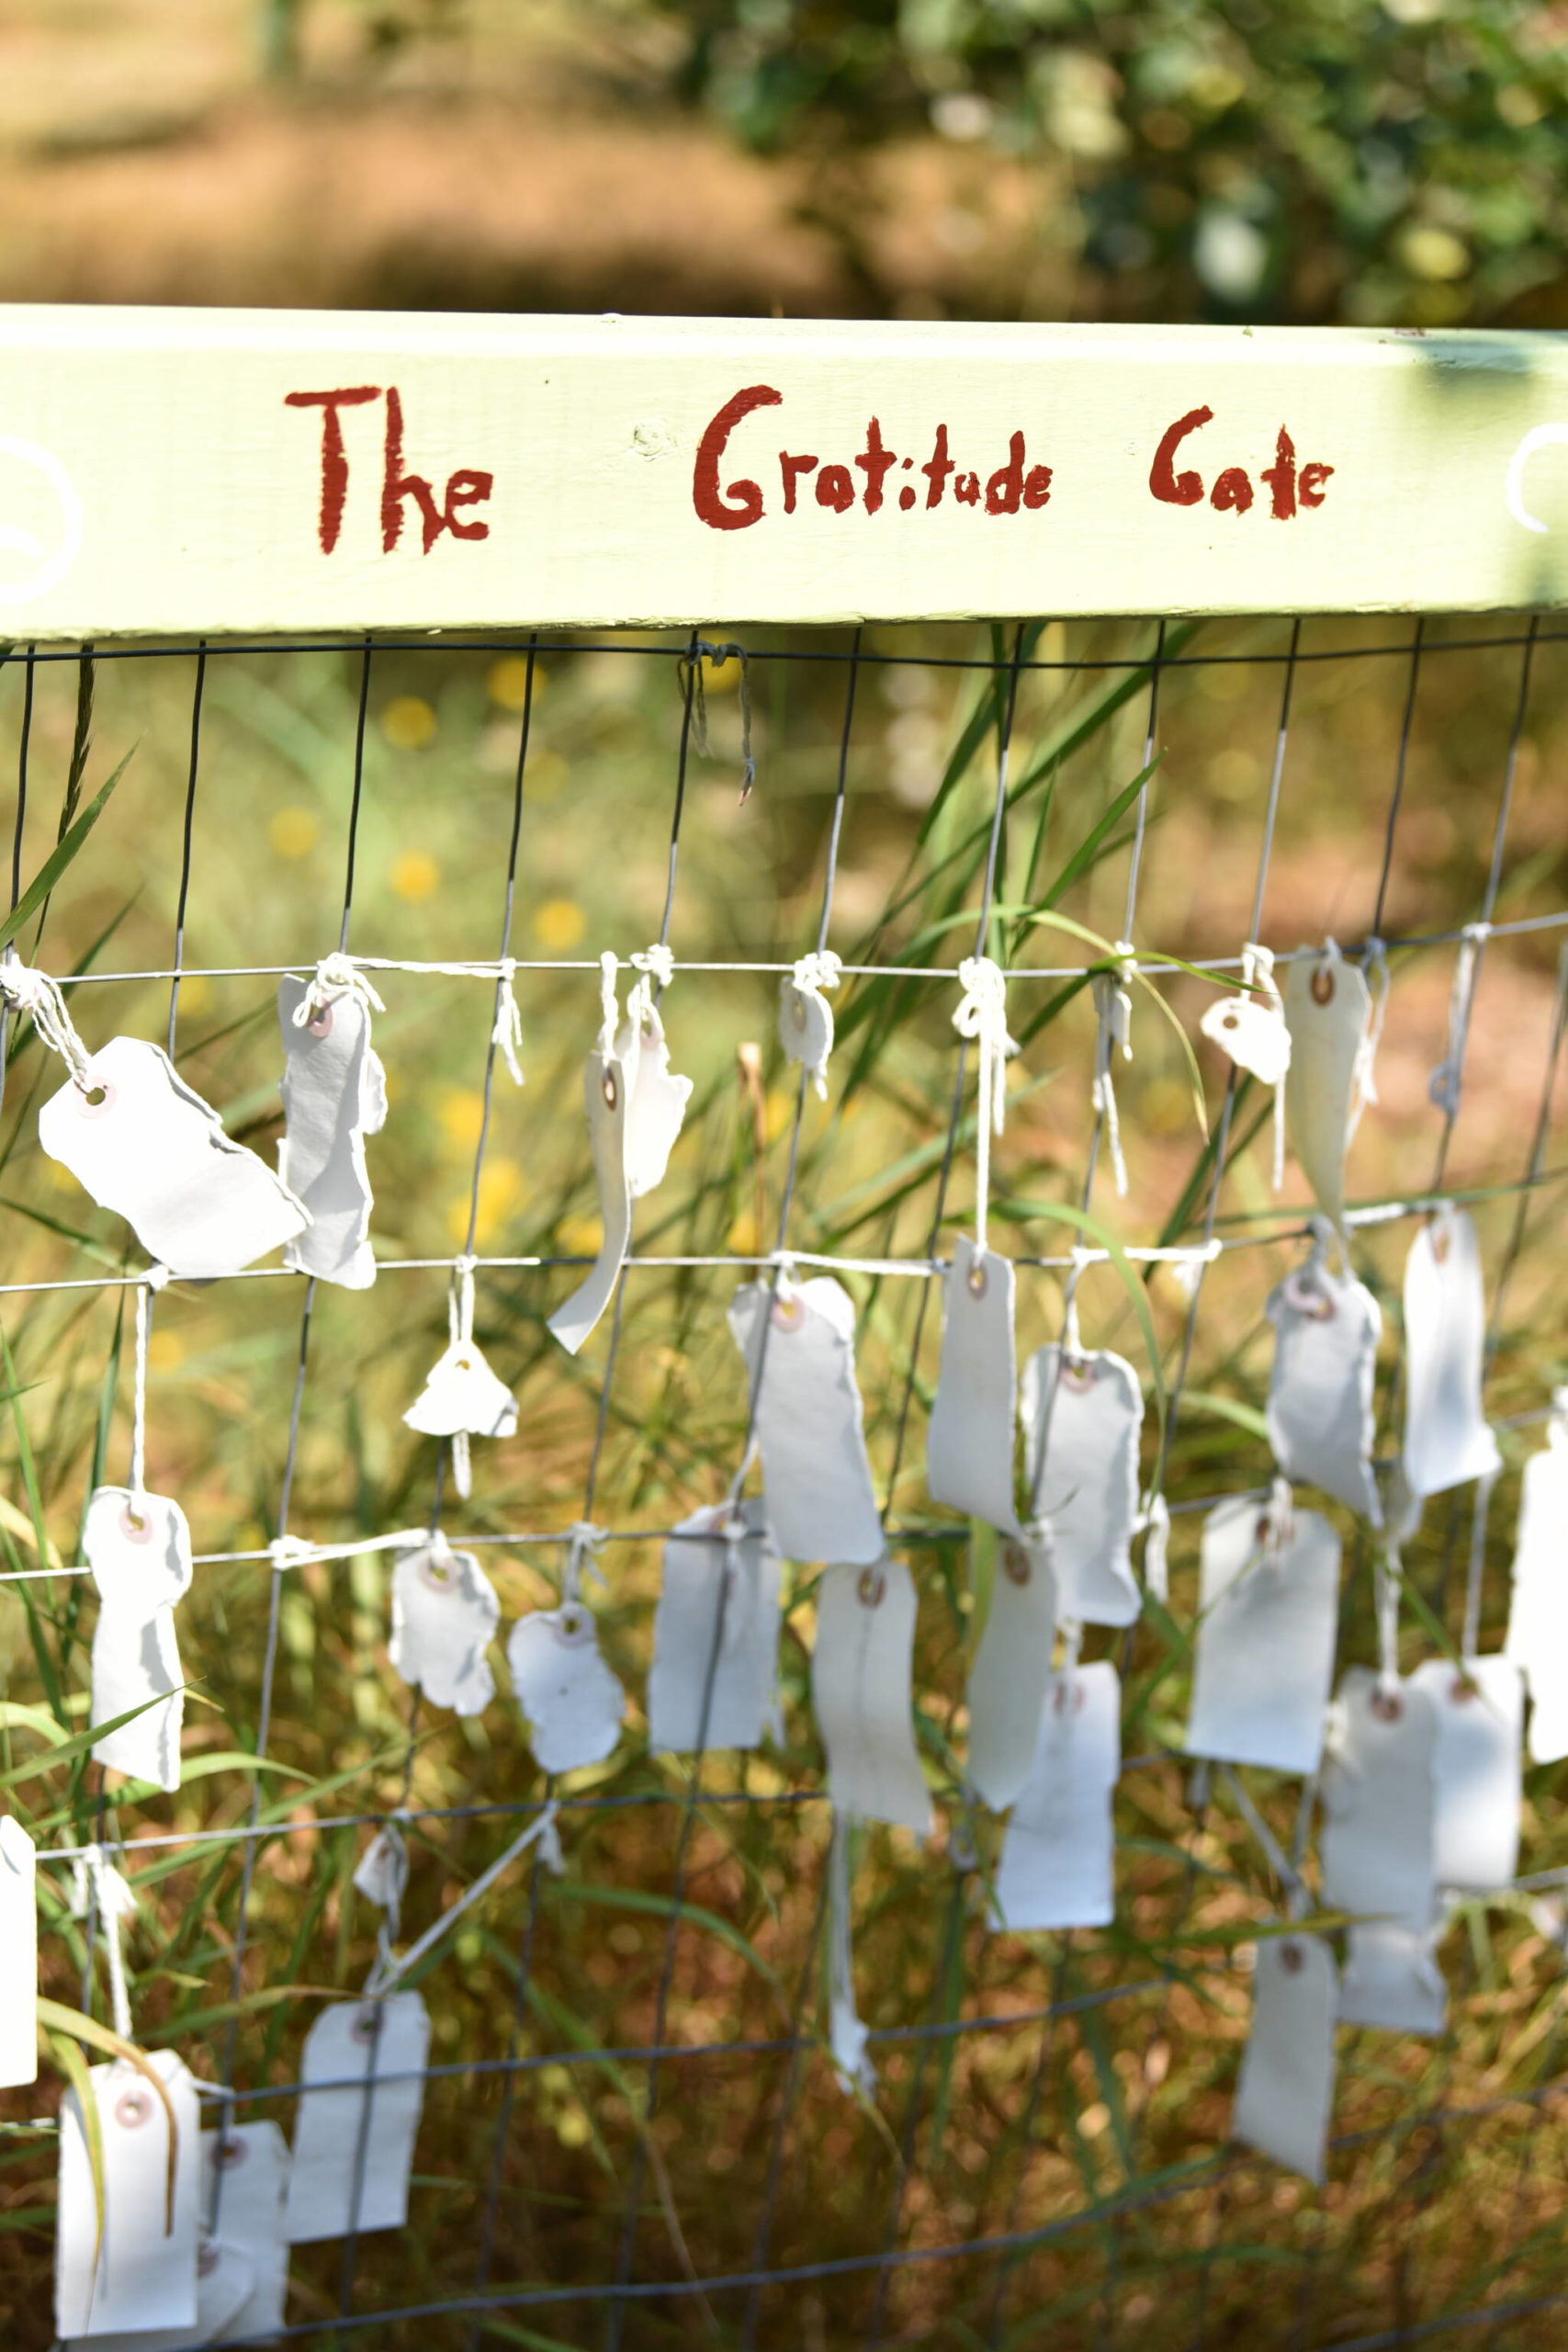 Notes dangle from the Gratitude Gate, one of many activities to do on the farm.